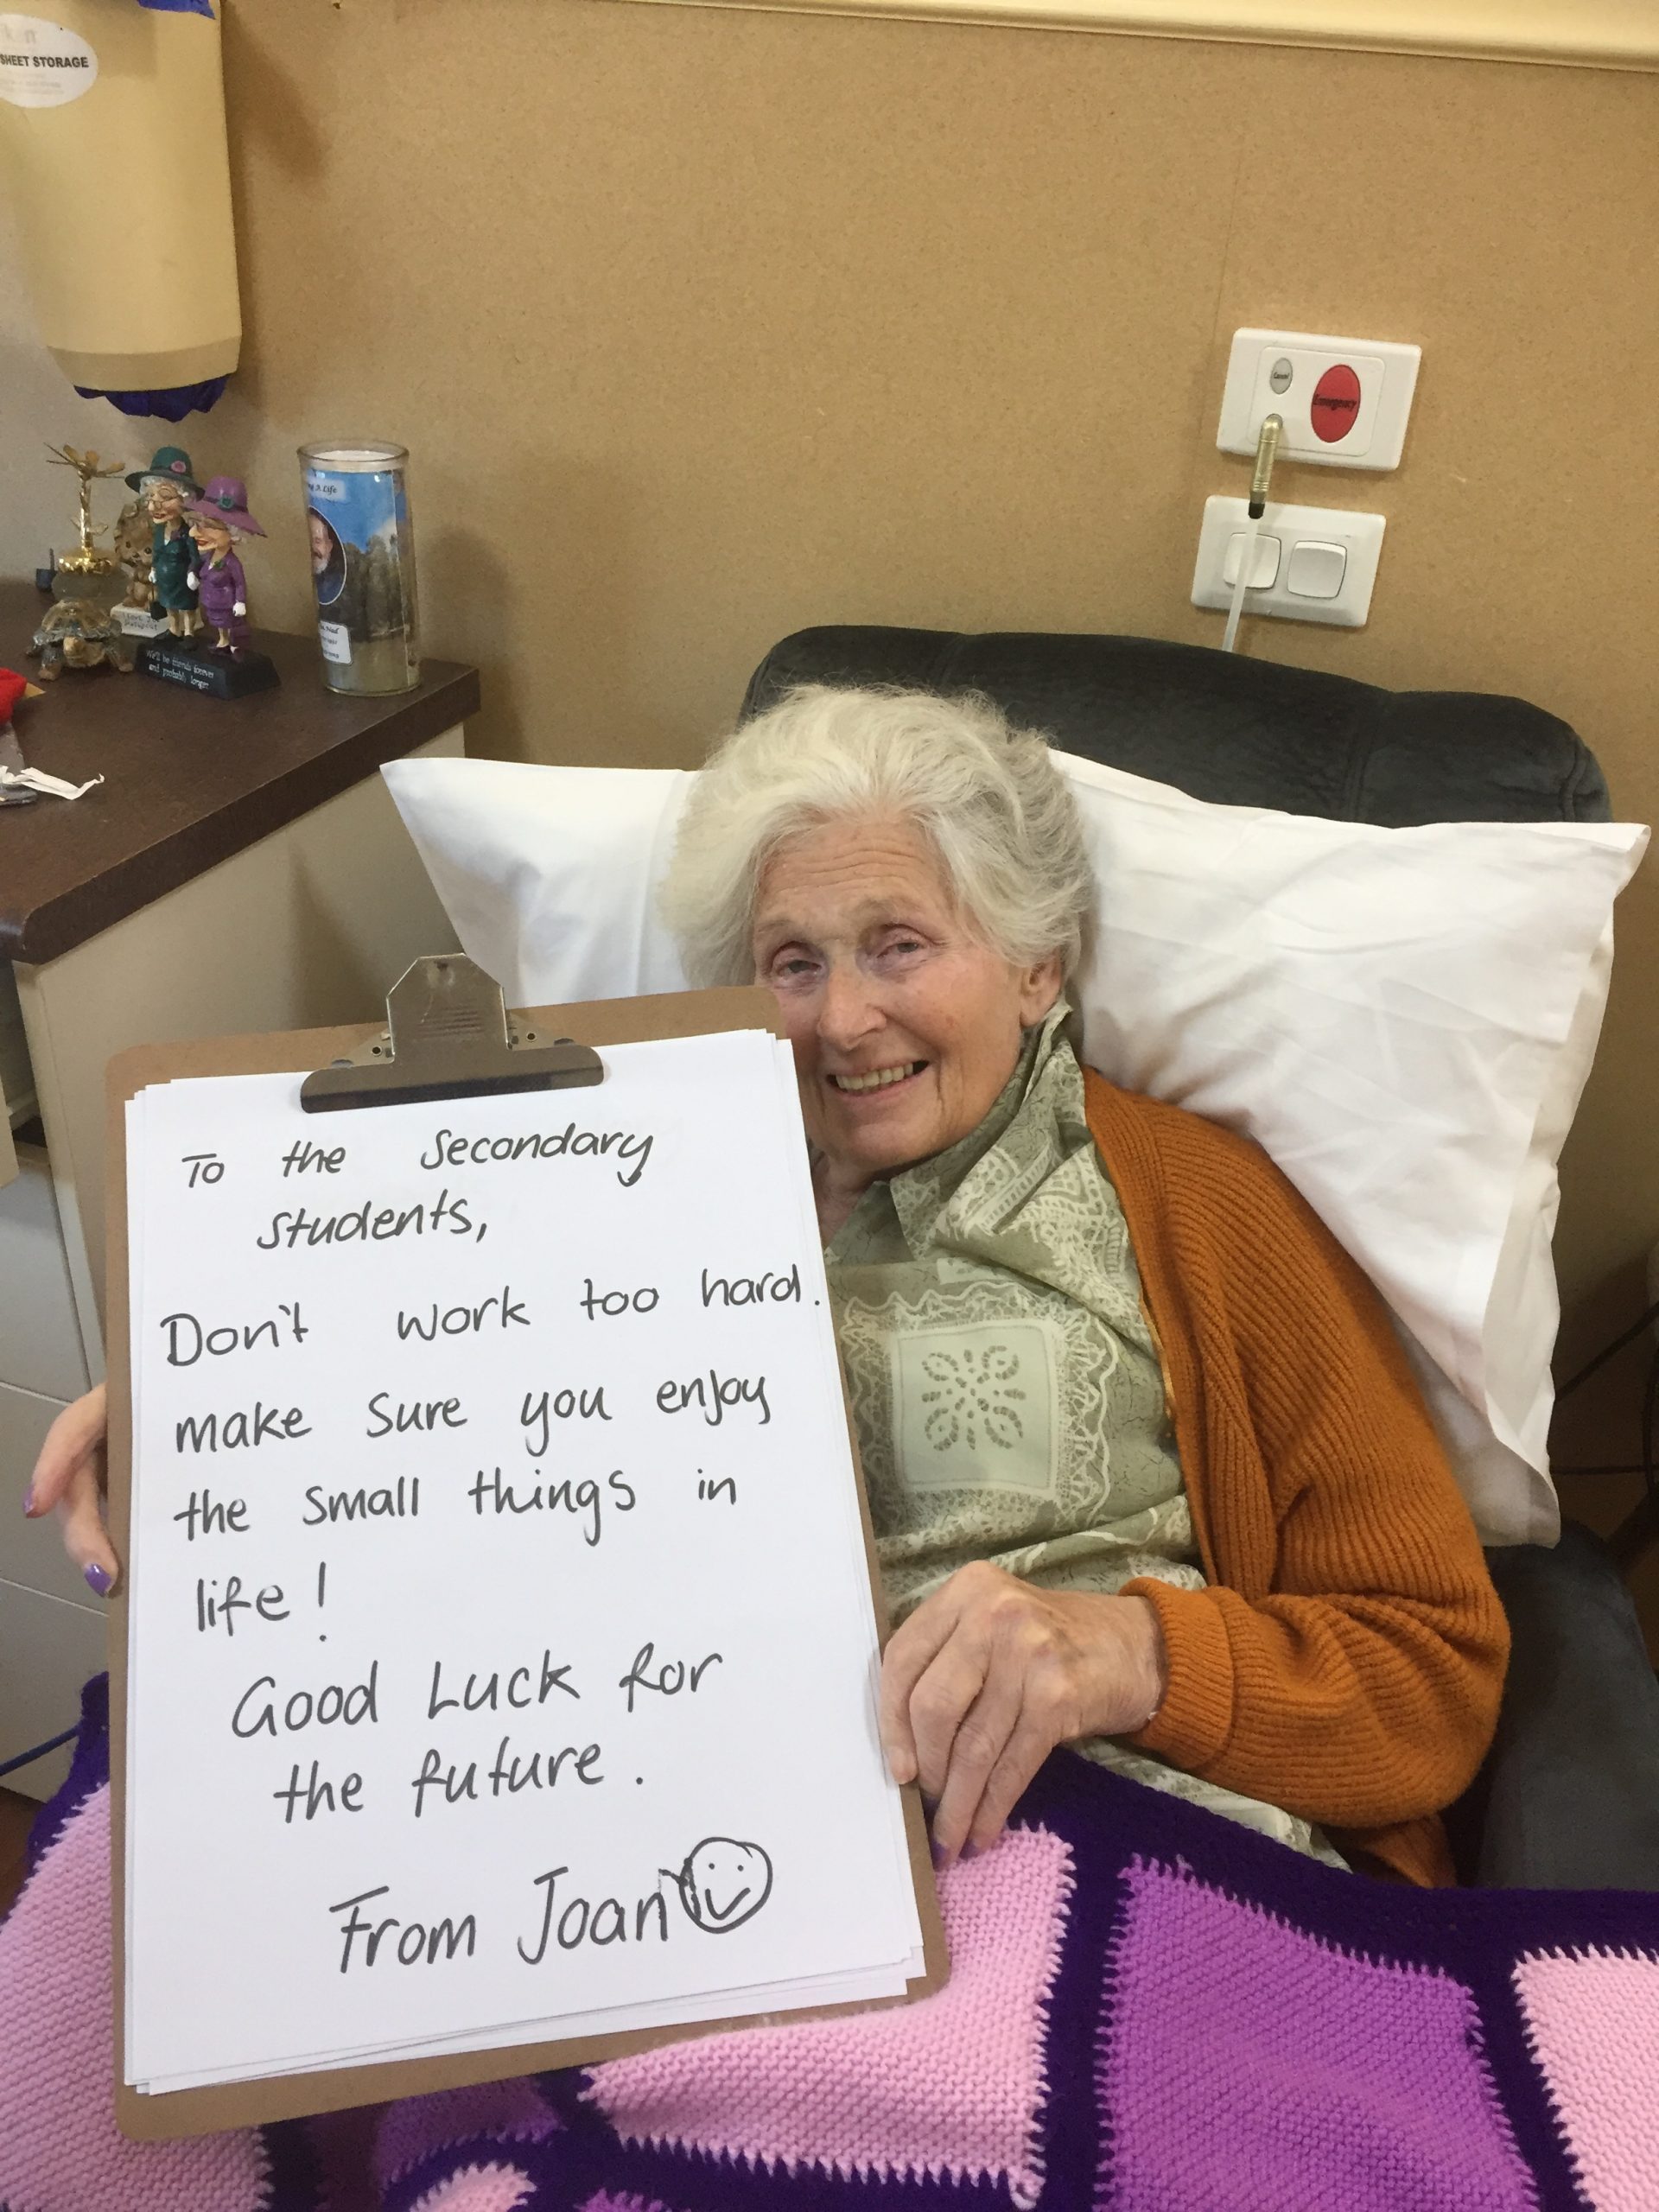 A female resident smiles at the camera whilst holding up a large clipboard with a hand written message to Secondary Students, which reads: "To the Secondary Students, Don't work too hard. Make sure you enjoy the small things in life. Good luck for the future. From Joan." 